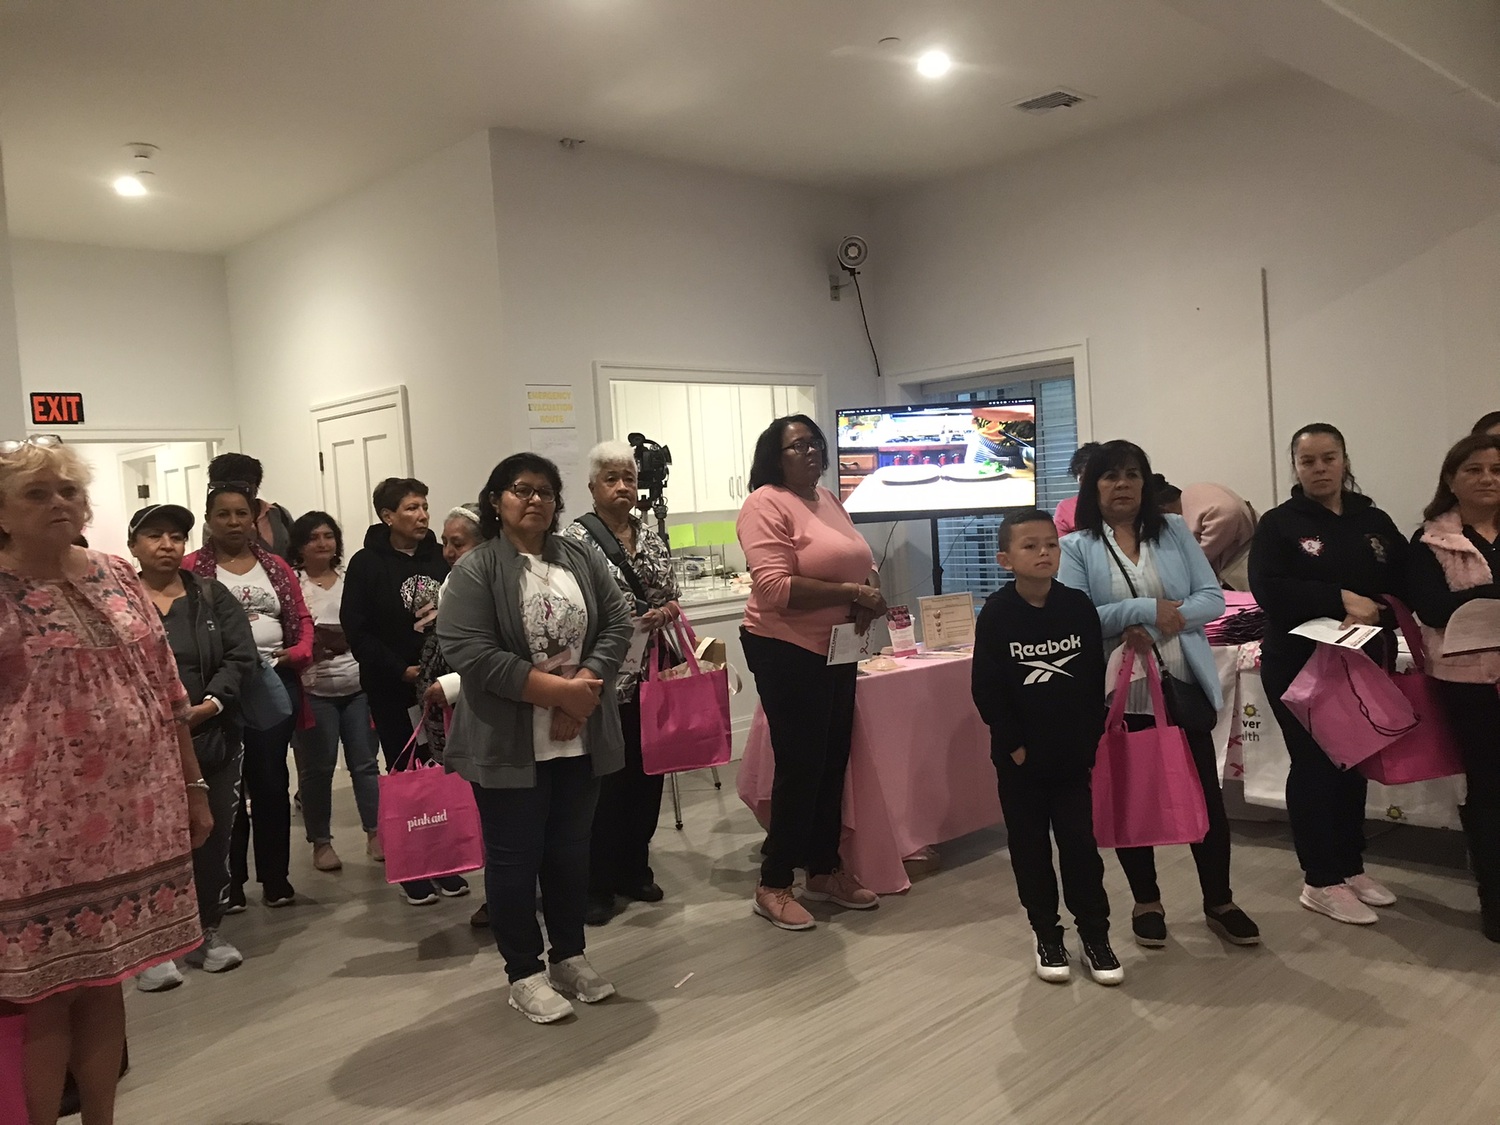 The second annual Breast Cancer Awareness Expo at the Bridgehampton Child Care and Recreational Center, sponsored by the Ellen Hermanson Foundation, was a success on Saturday, with several speakers and other wellness initiatives.